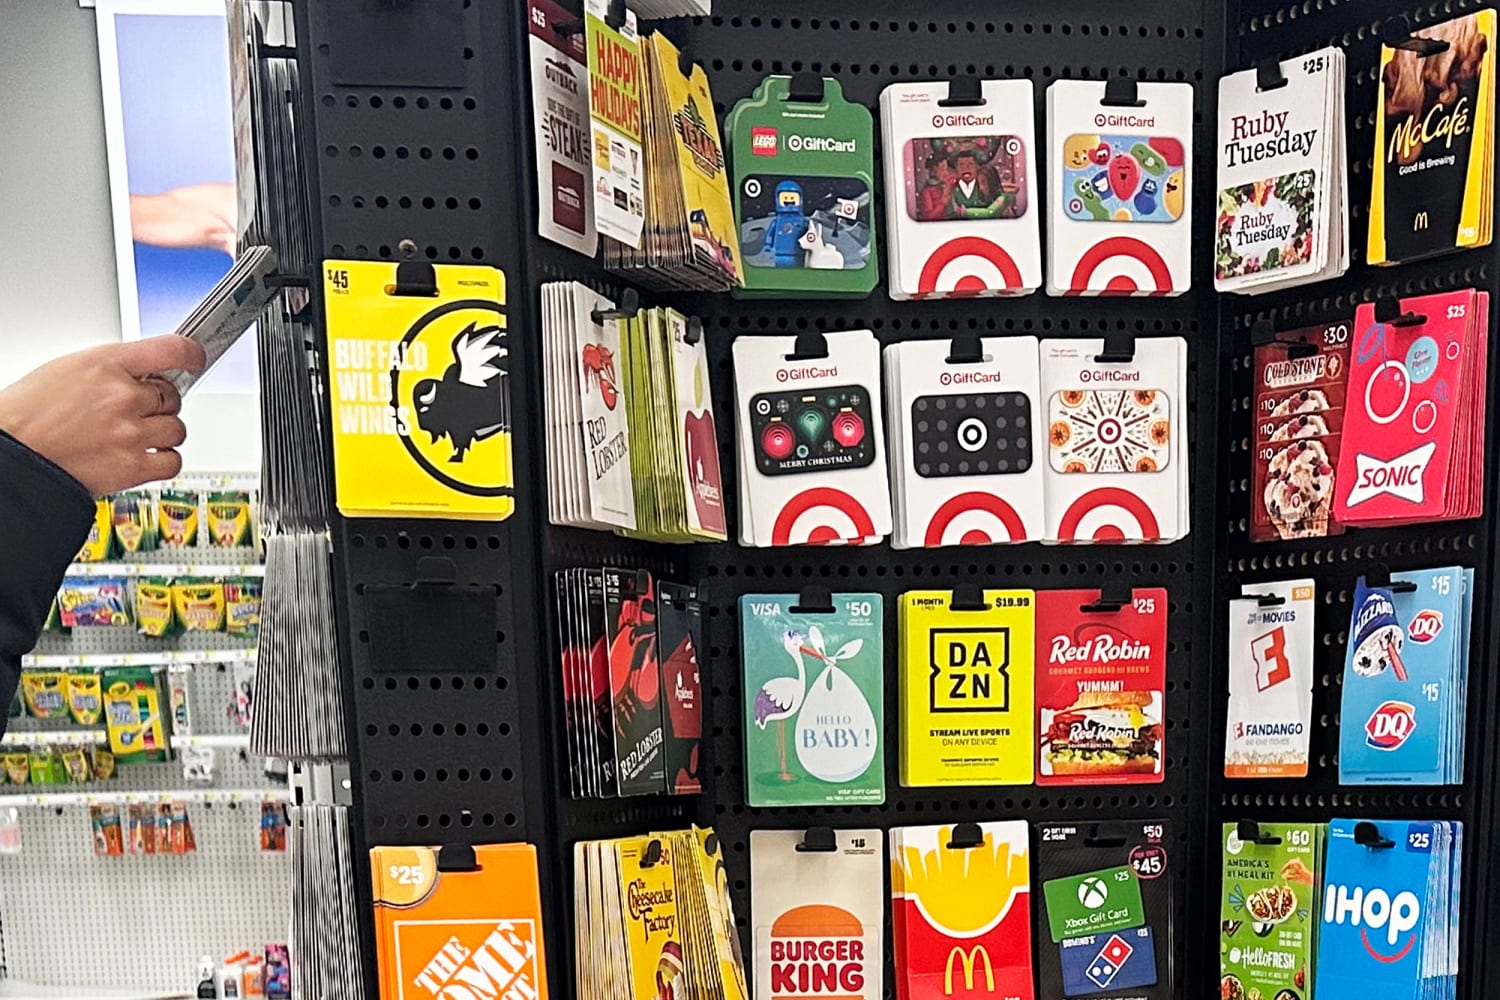 Here’s what happens to unspent gift cards